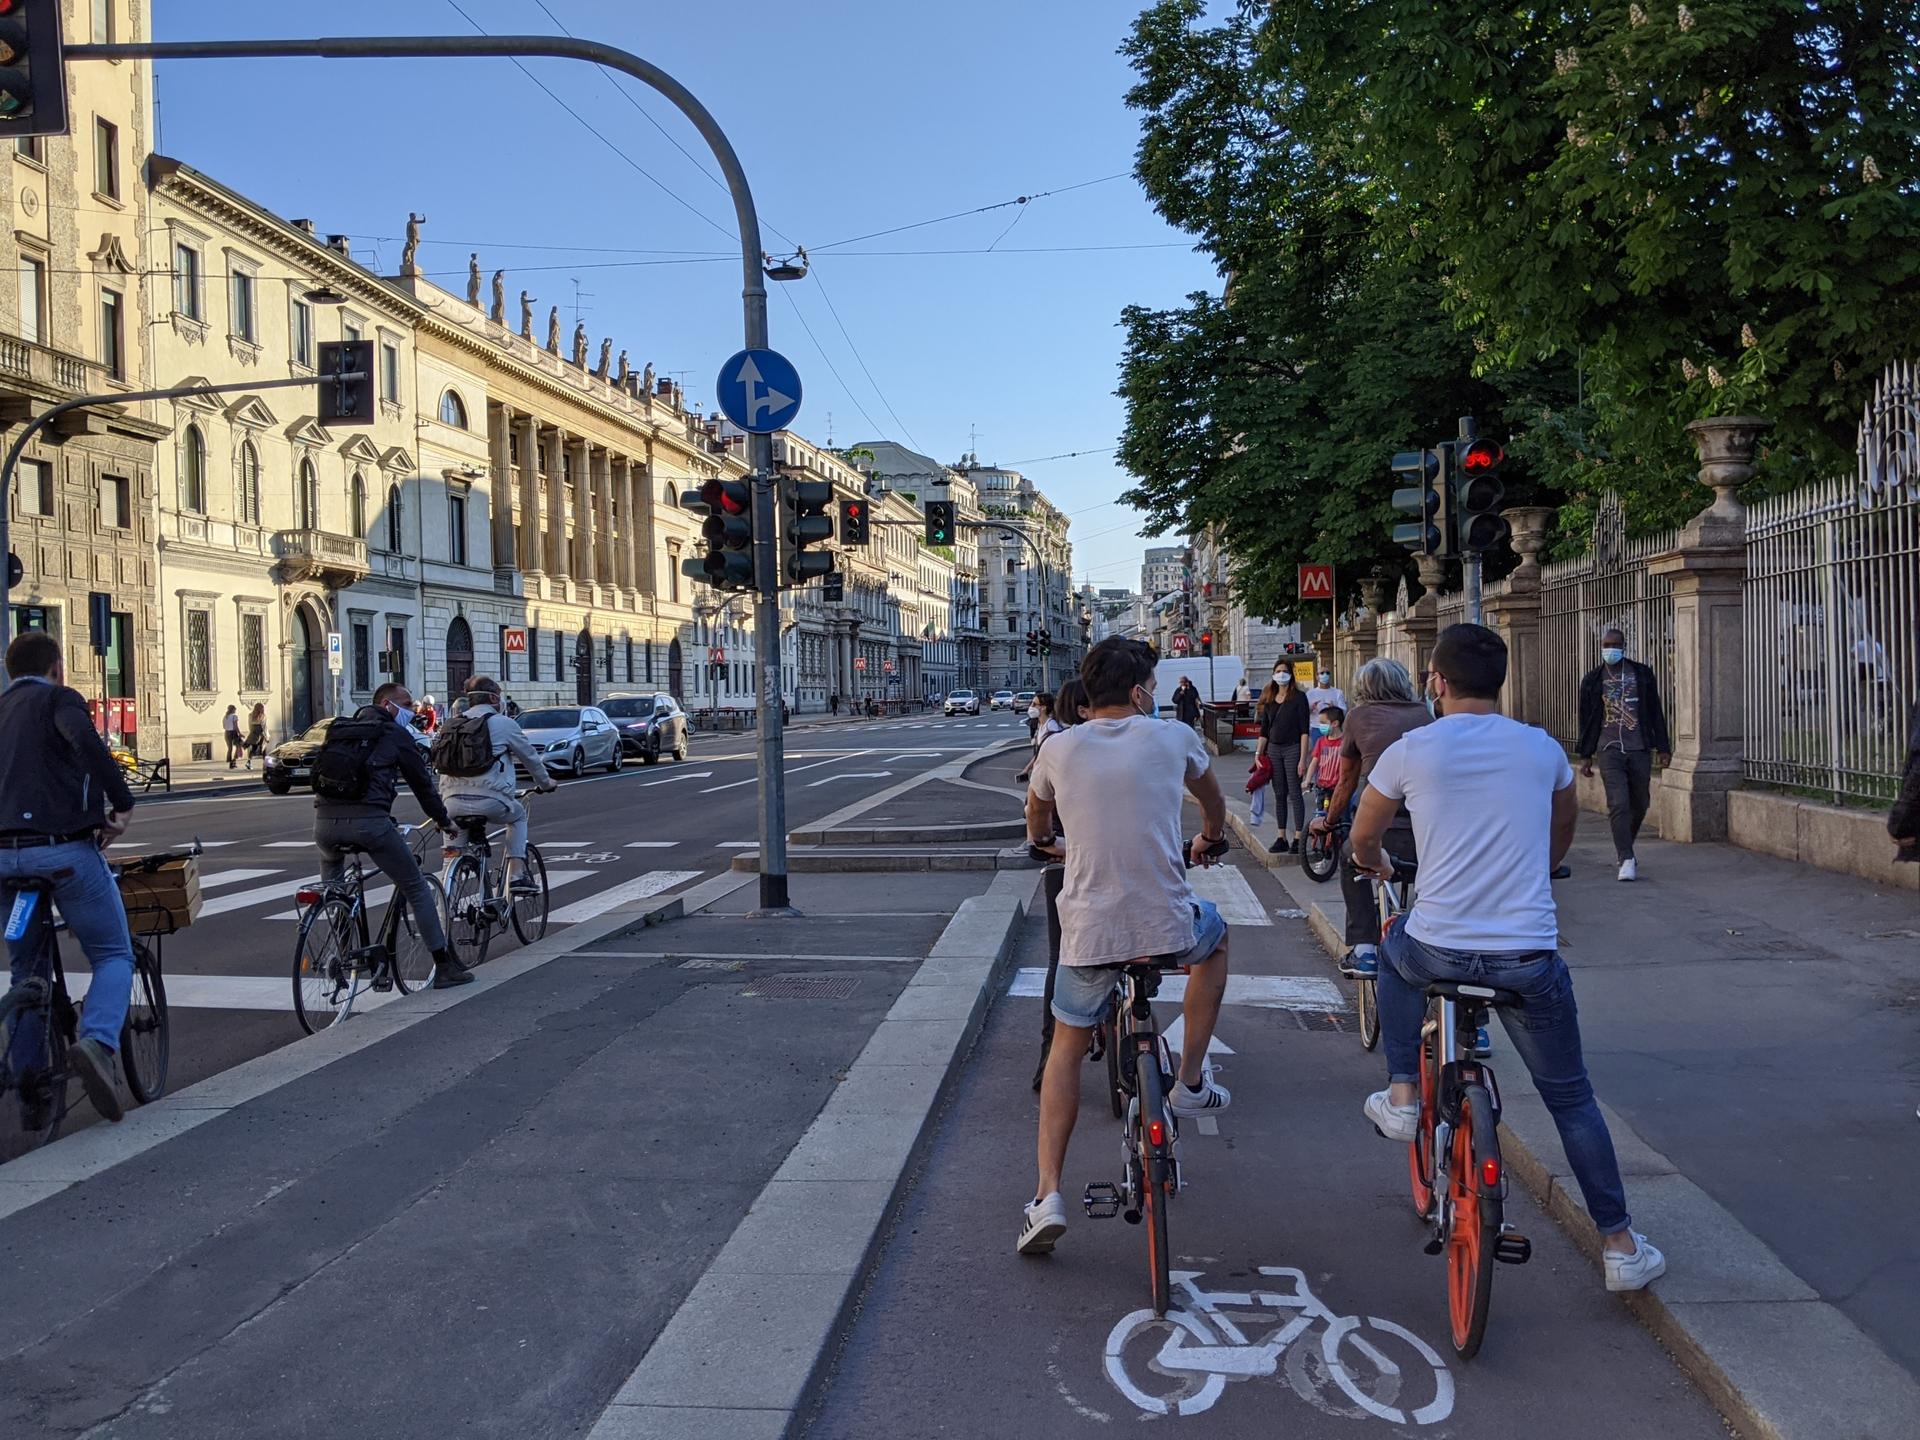 Corso Buenos Aires is Milan’s first street to be transformed as part of a citywide plan to convert 22 miles of roads this summer into bike paths and pedestrian areas. 